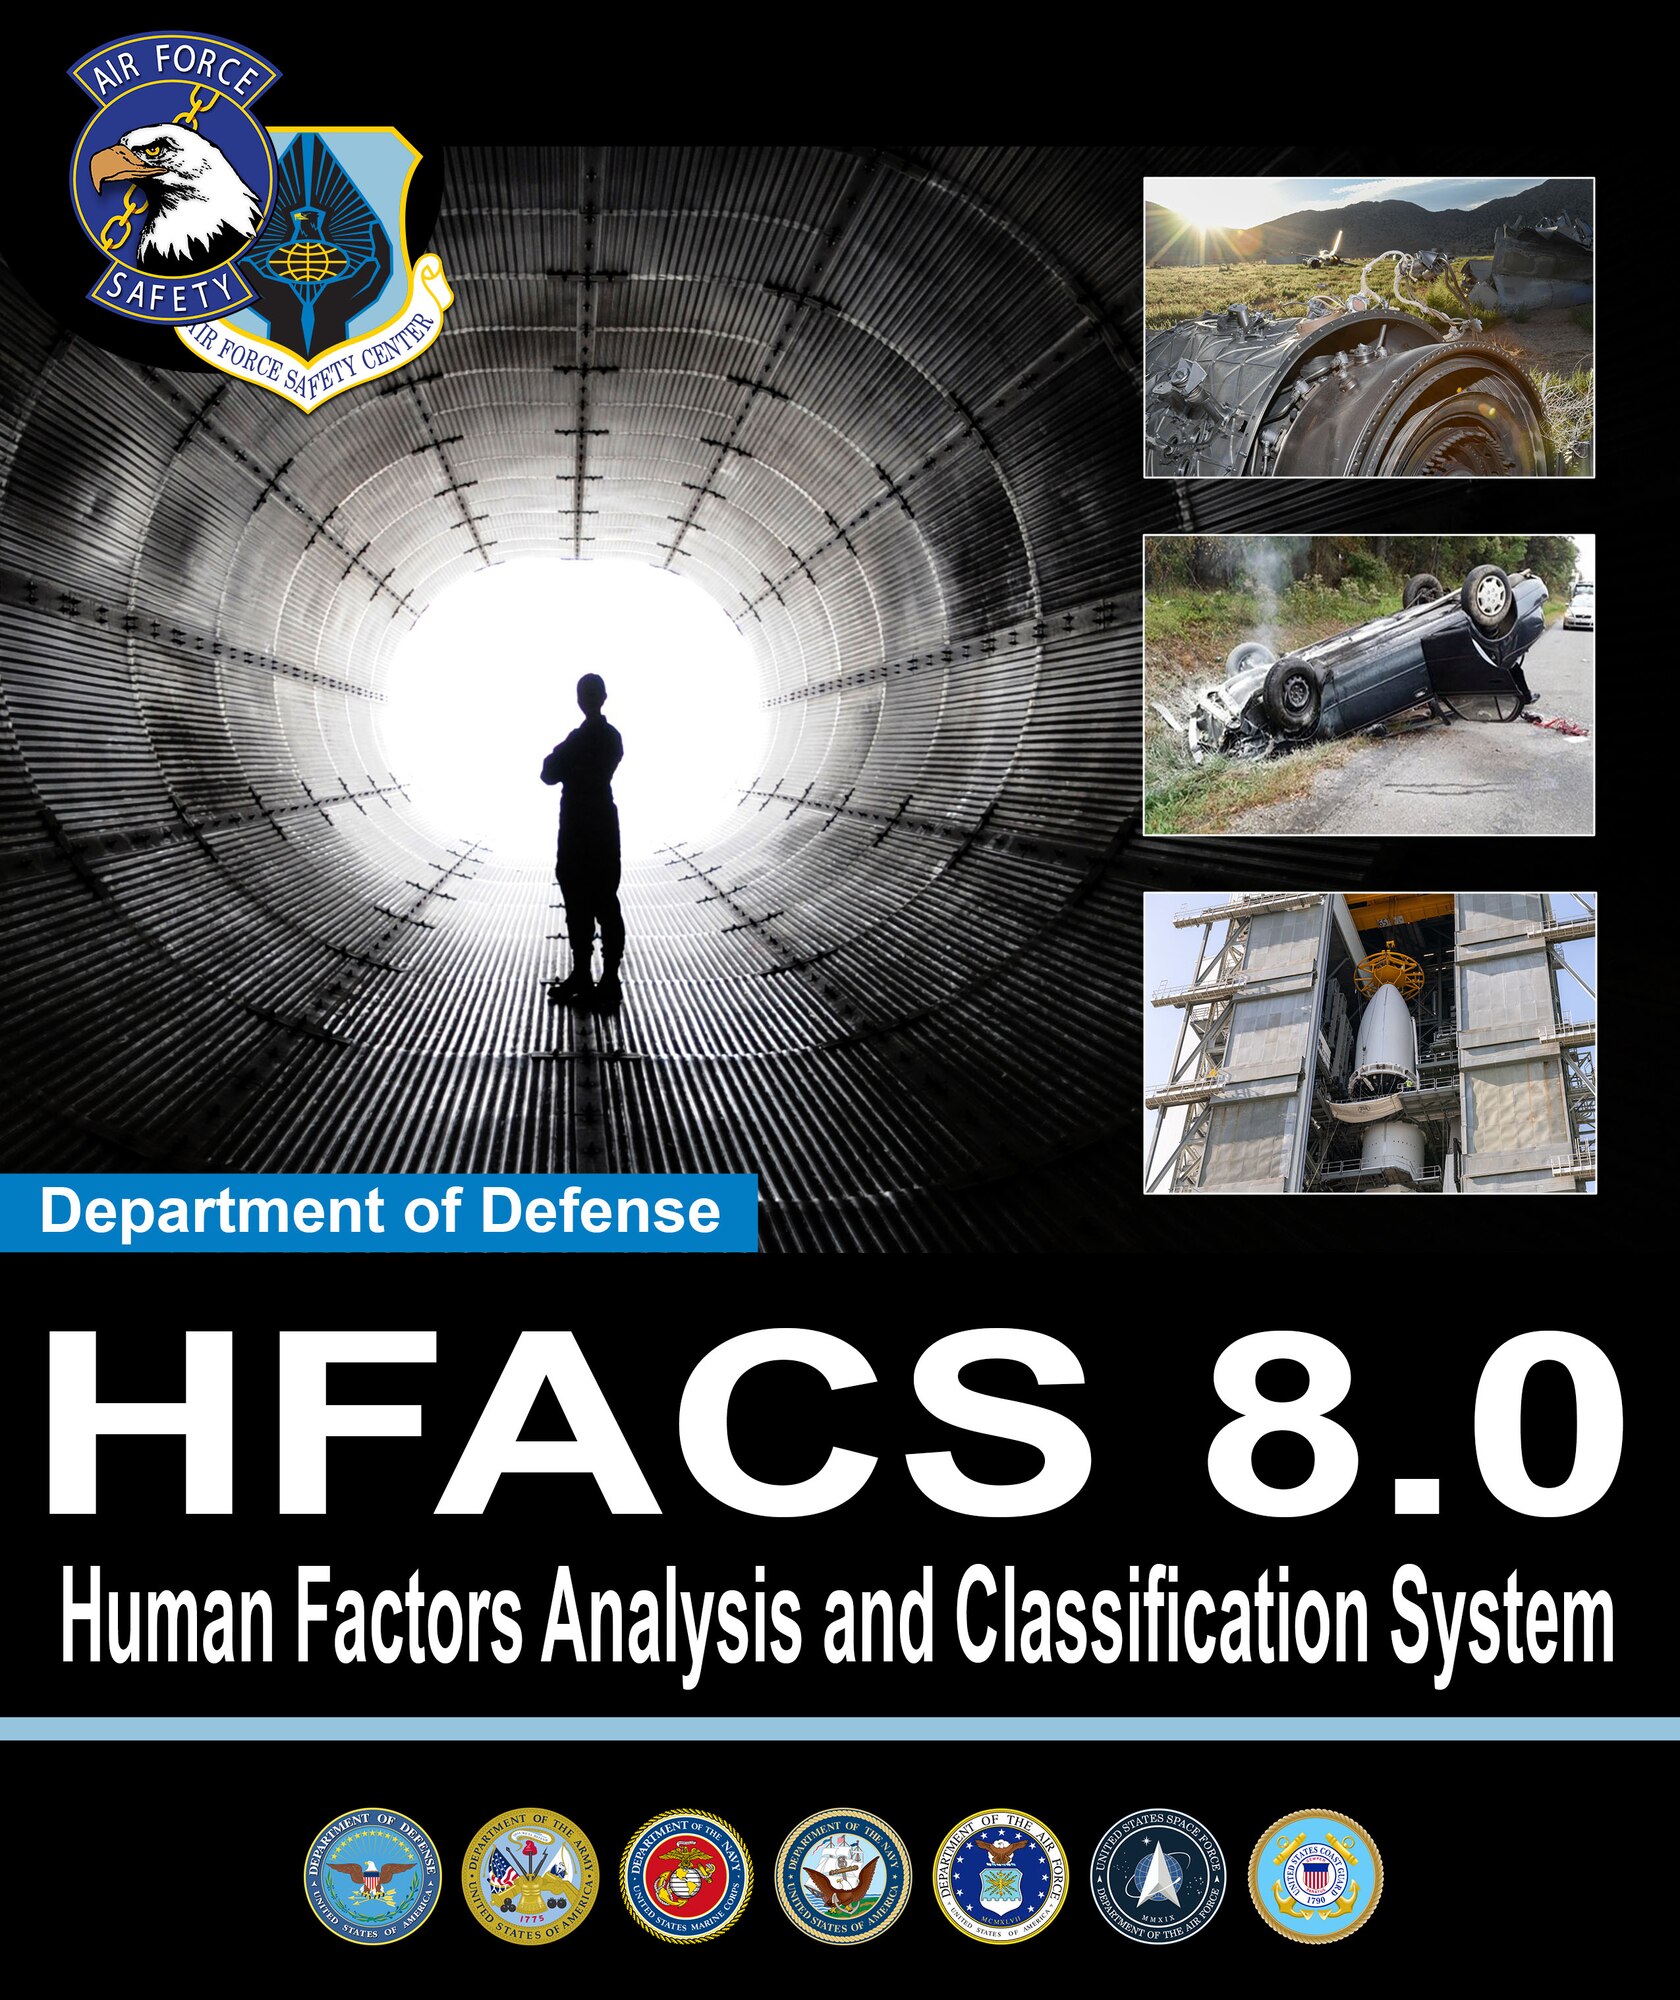 Graphic for the Human Factors Analysis and Classification System 8.0